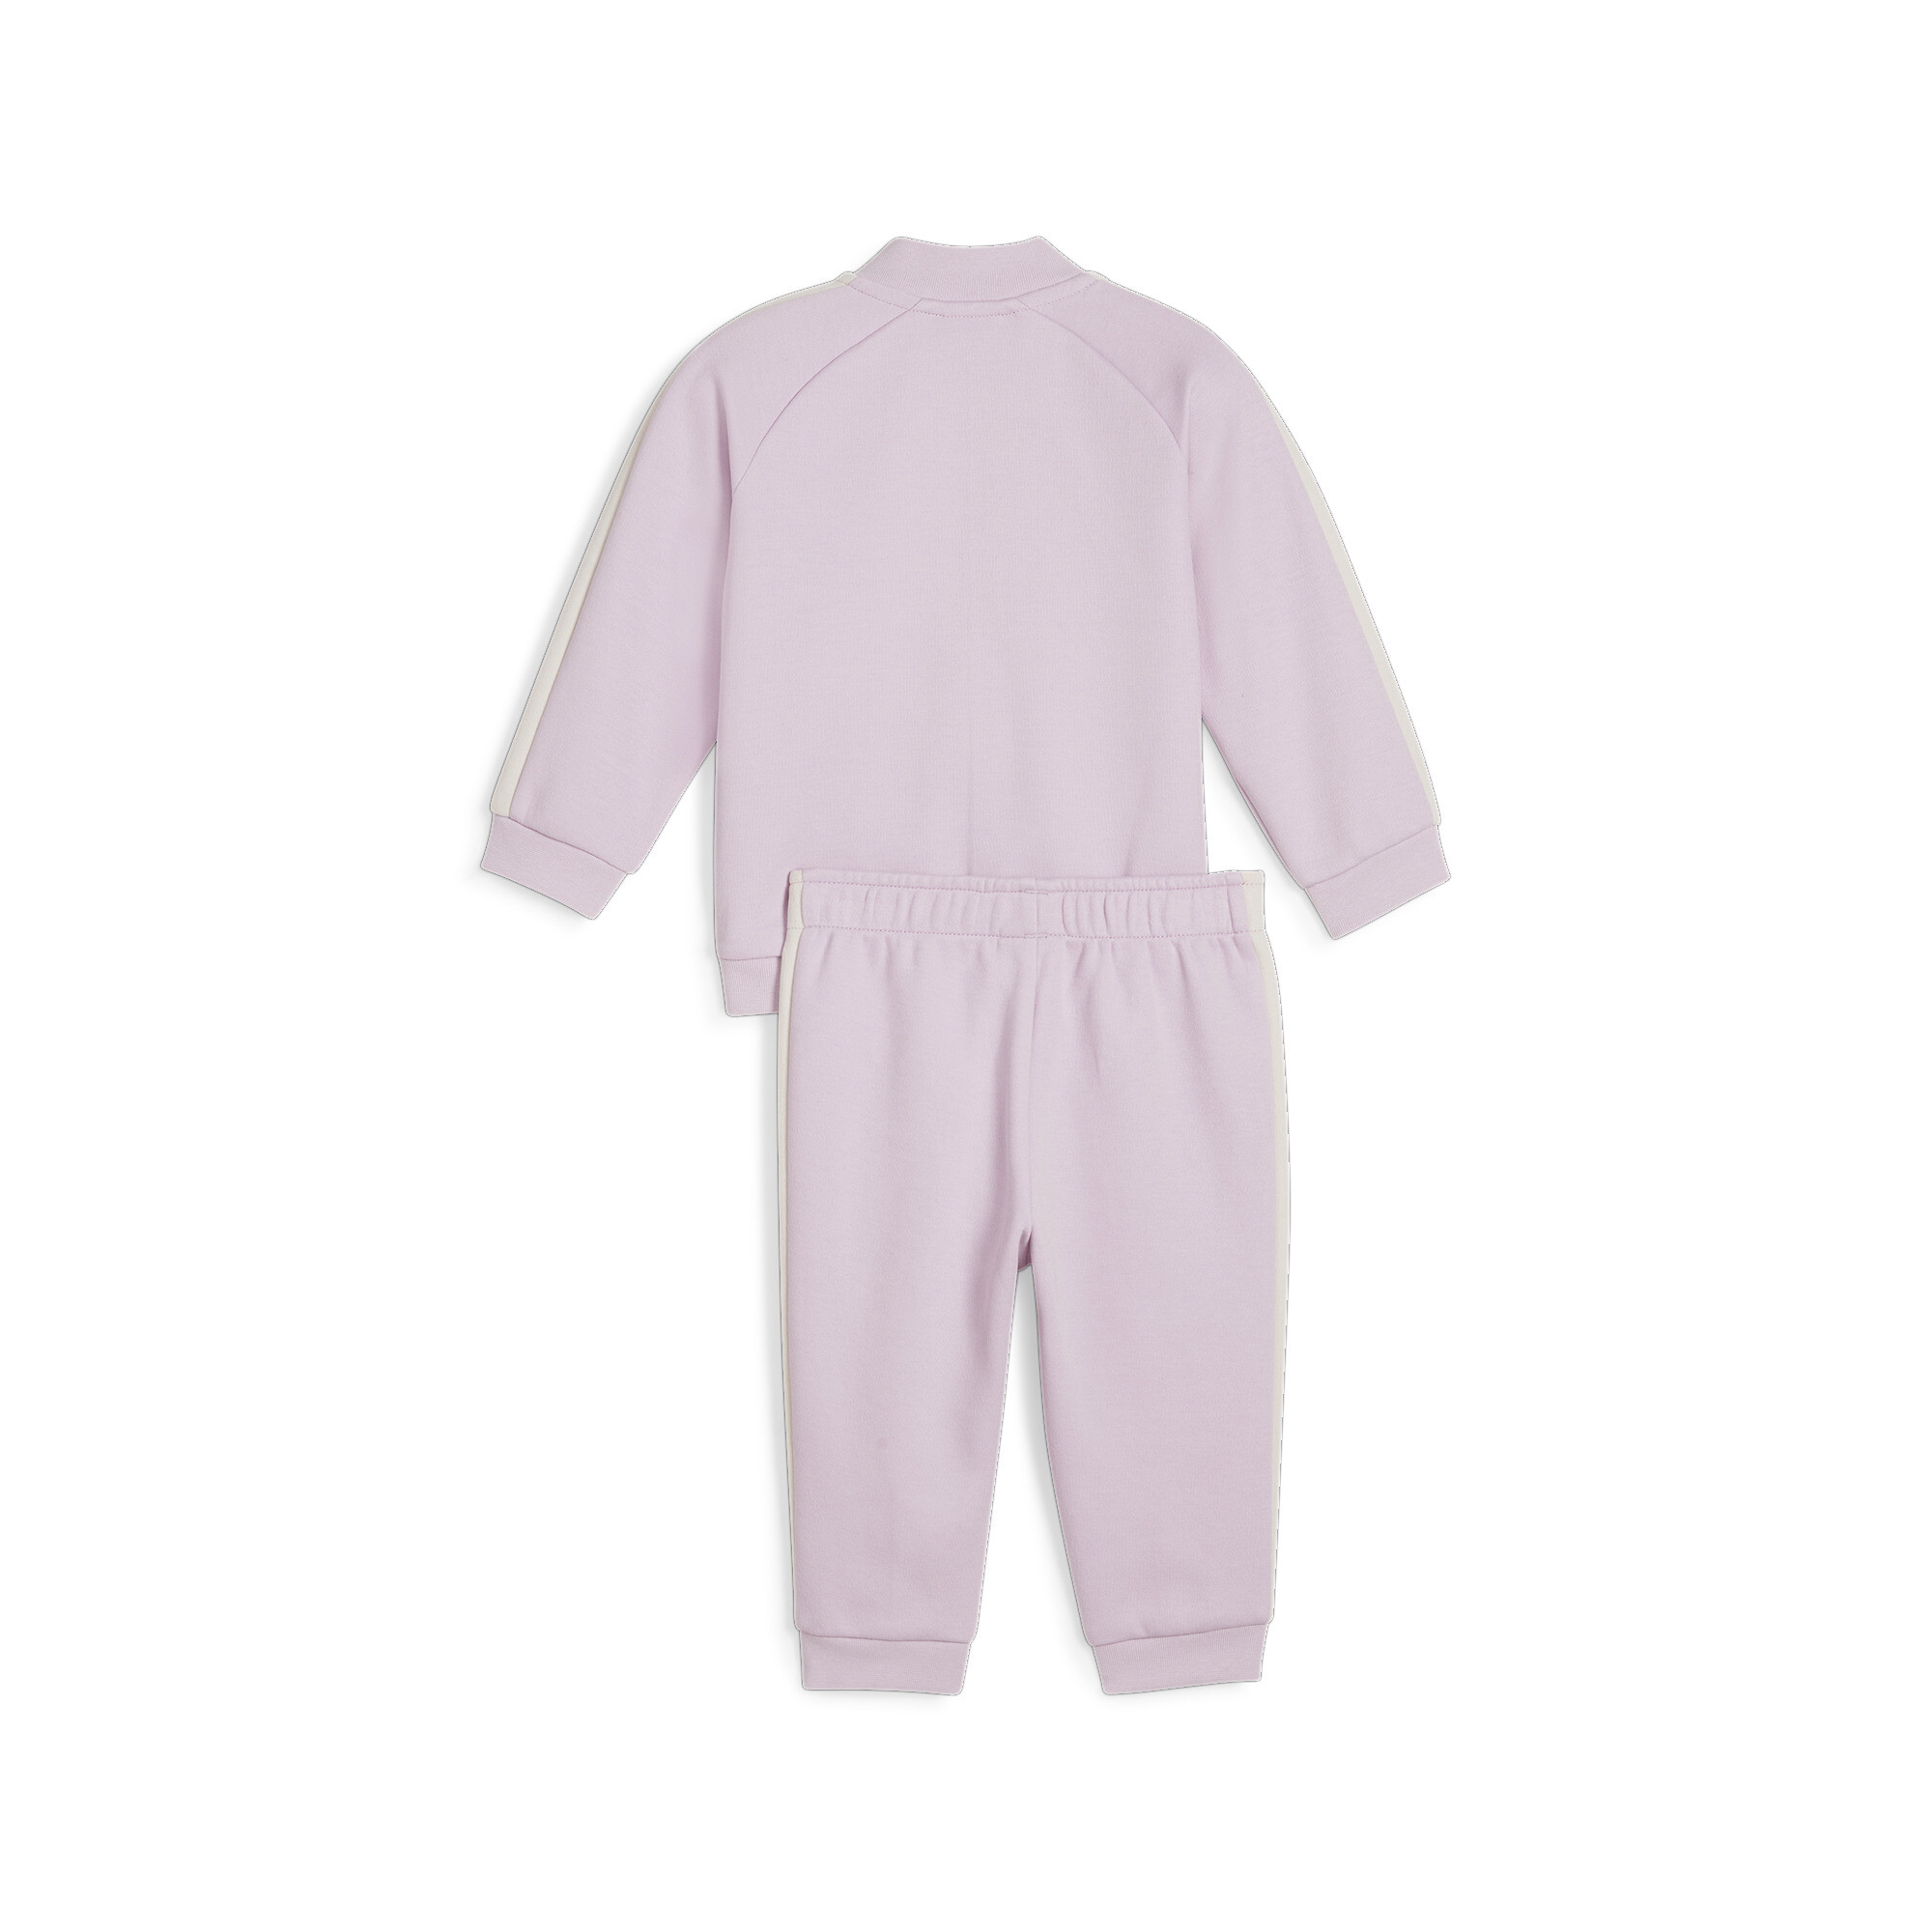 PUMA MINICATS T7 ICONIC Baby Tracksuit Set In 90 - Purple, Size 2-3 Youth